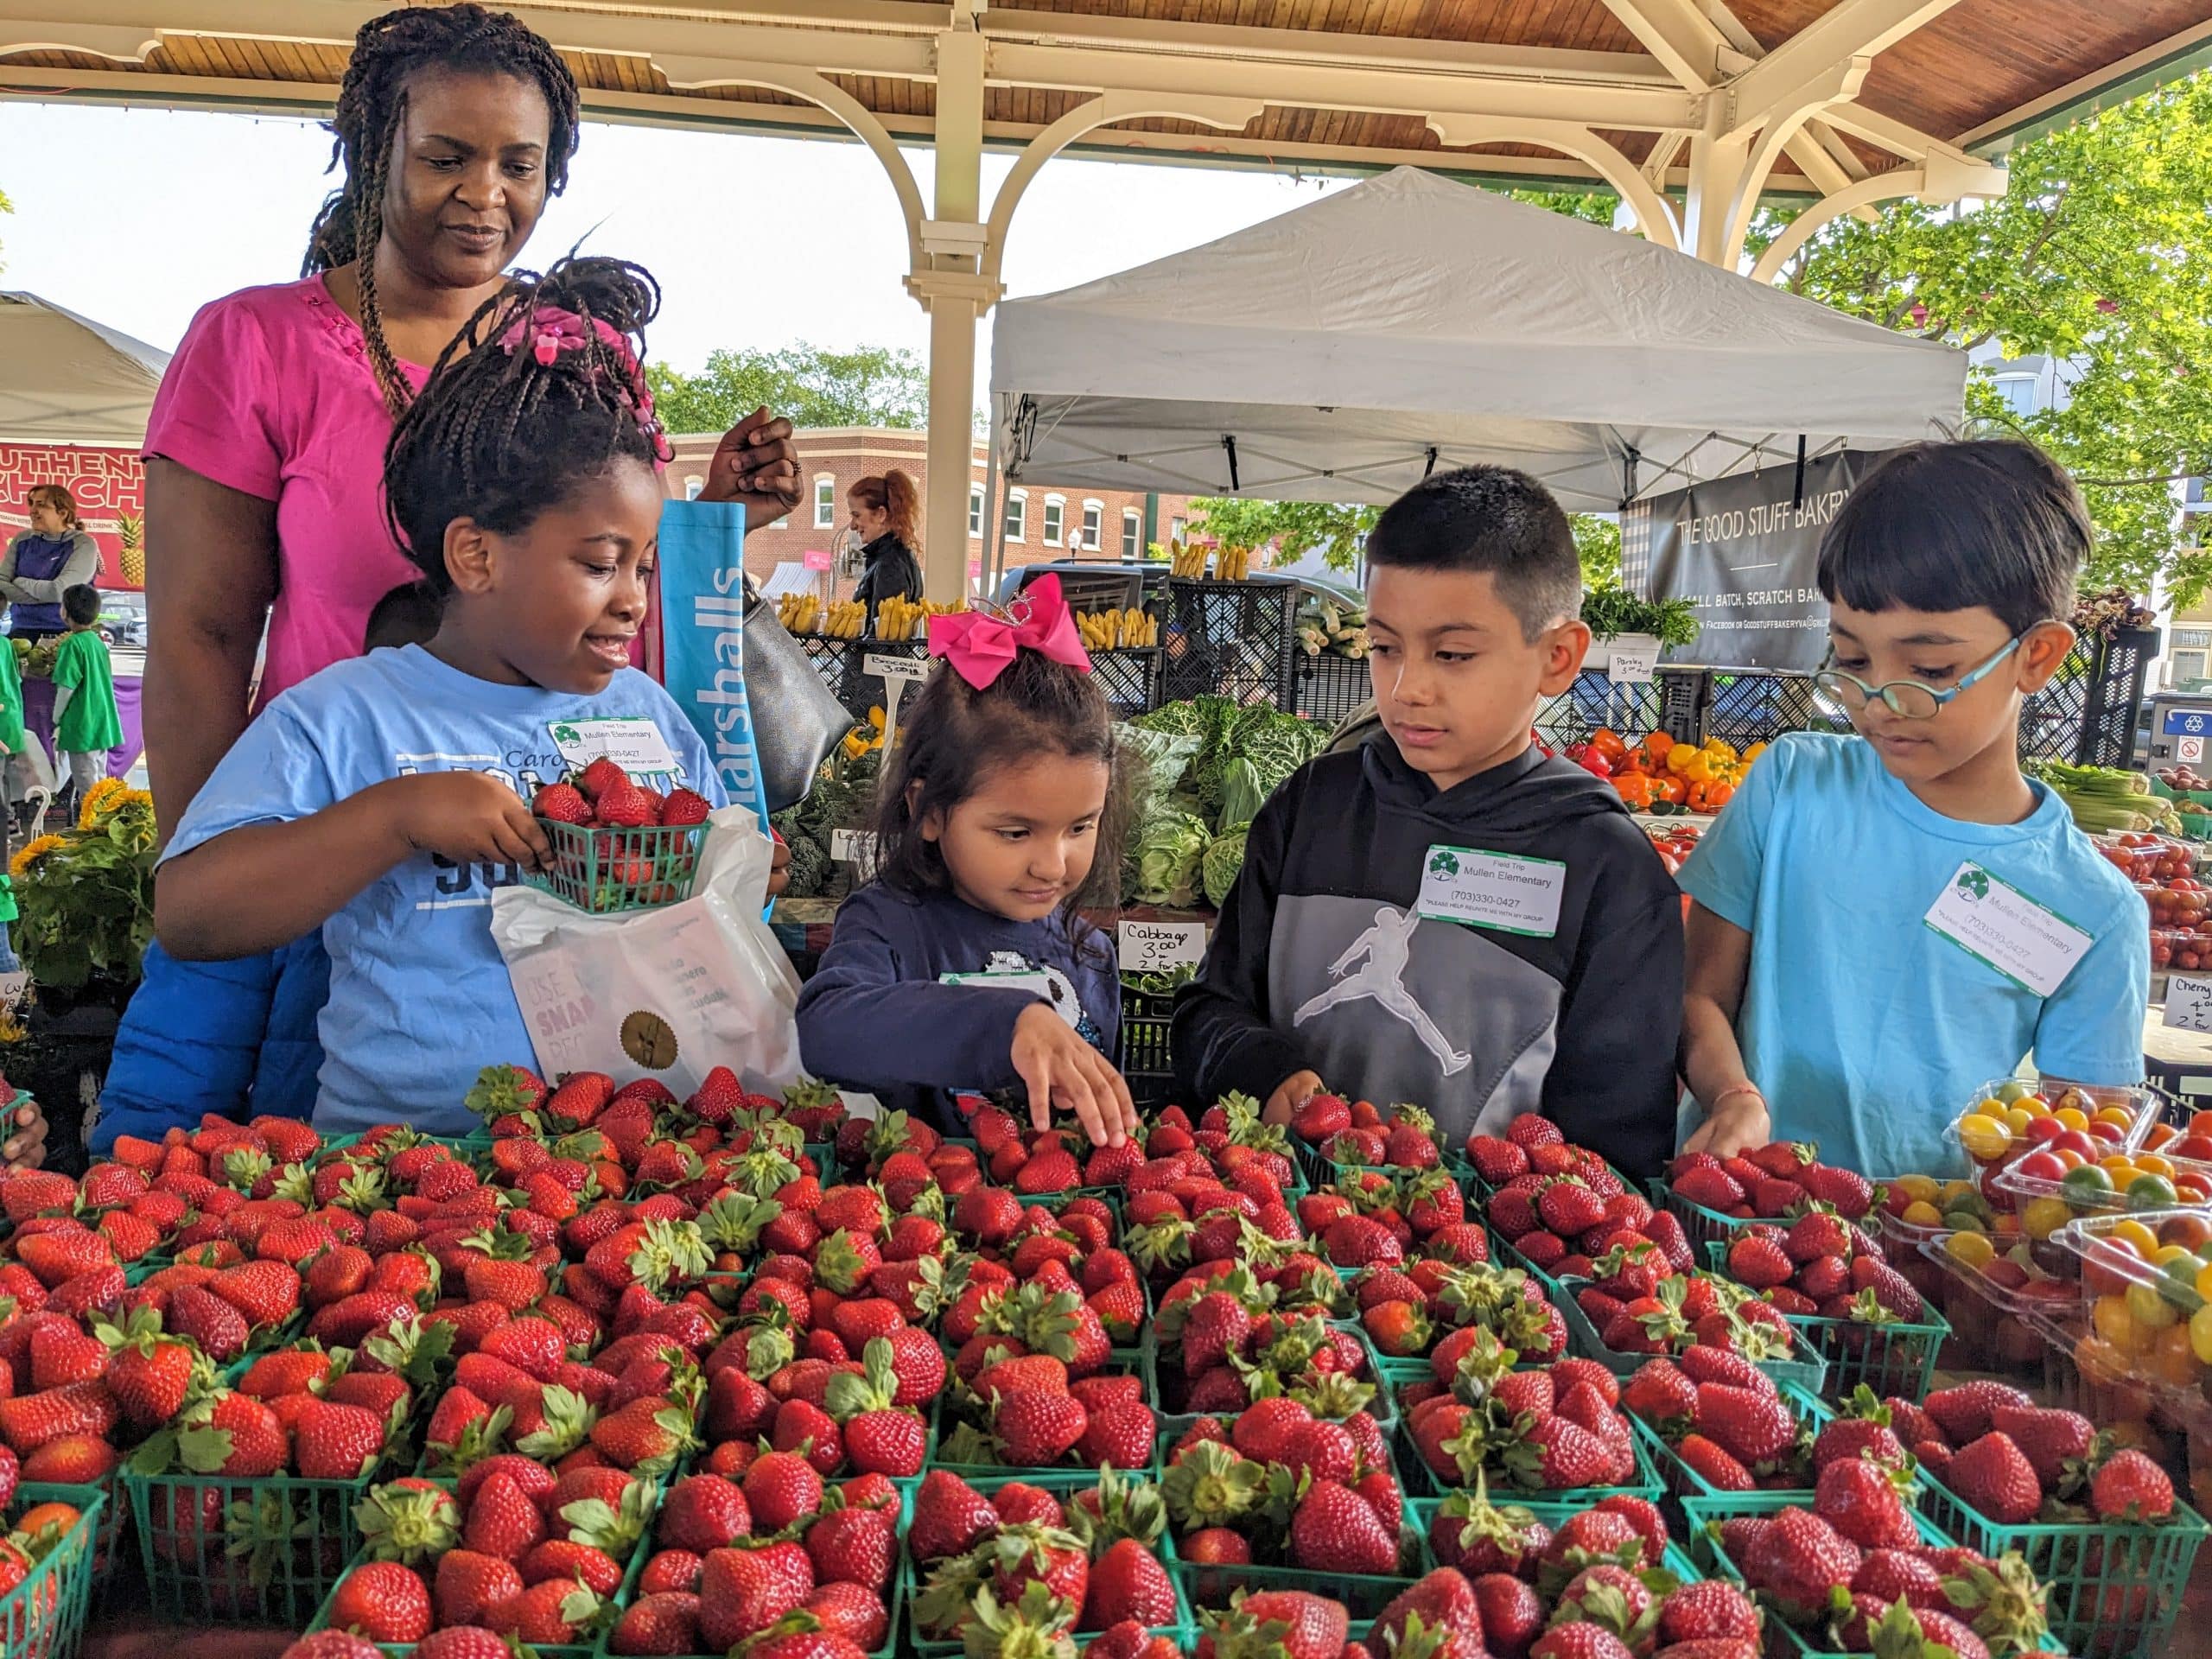 Fun and Learning at the Farmers Market Historic Manassas, Inc